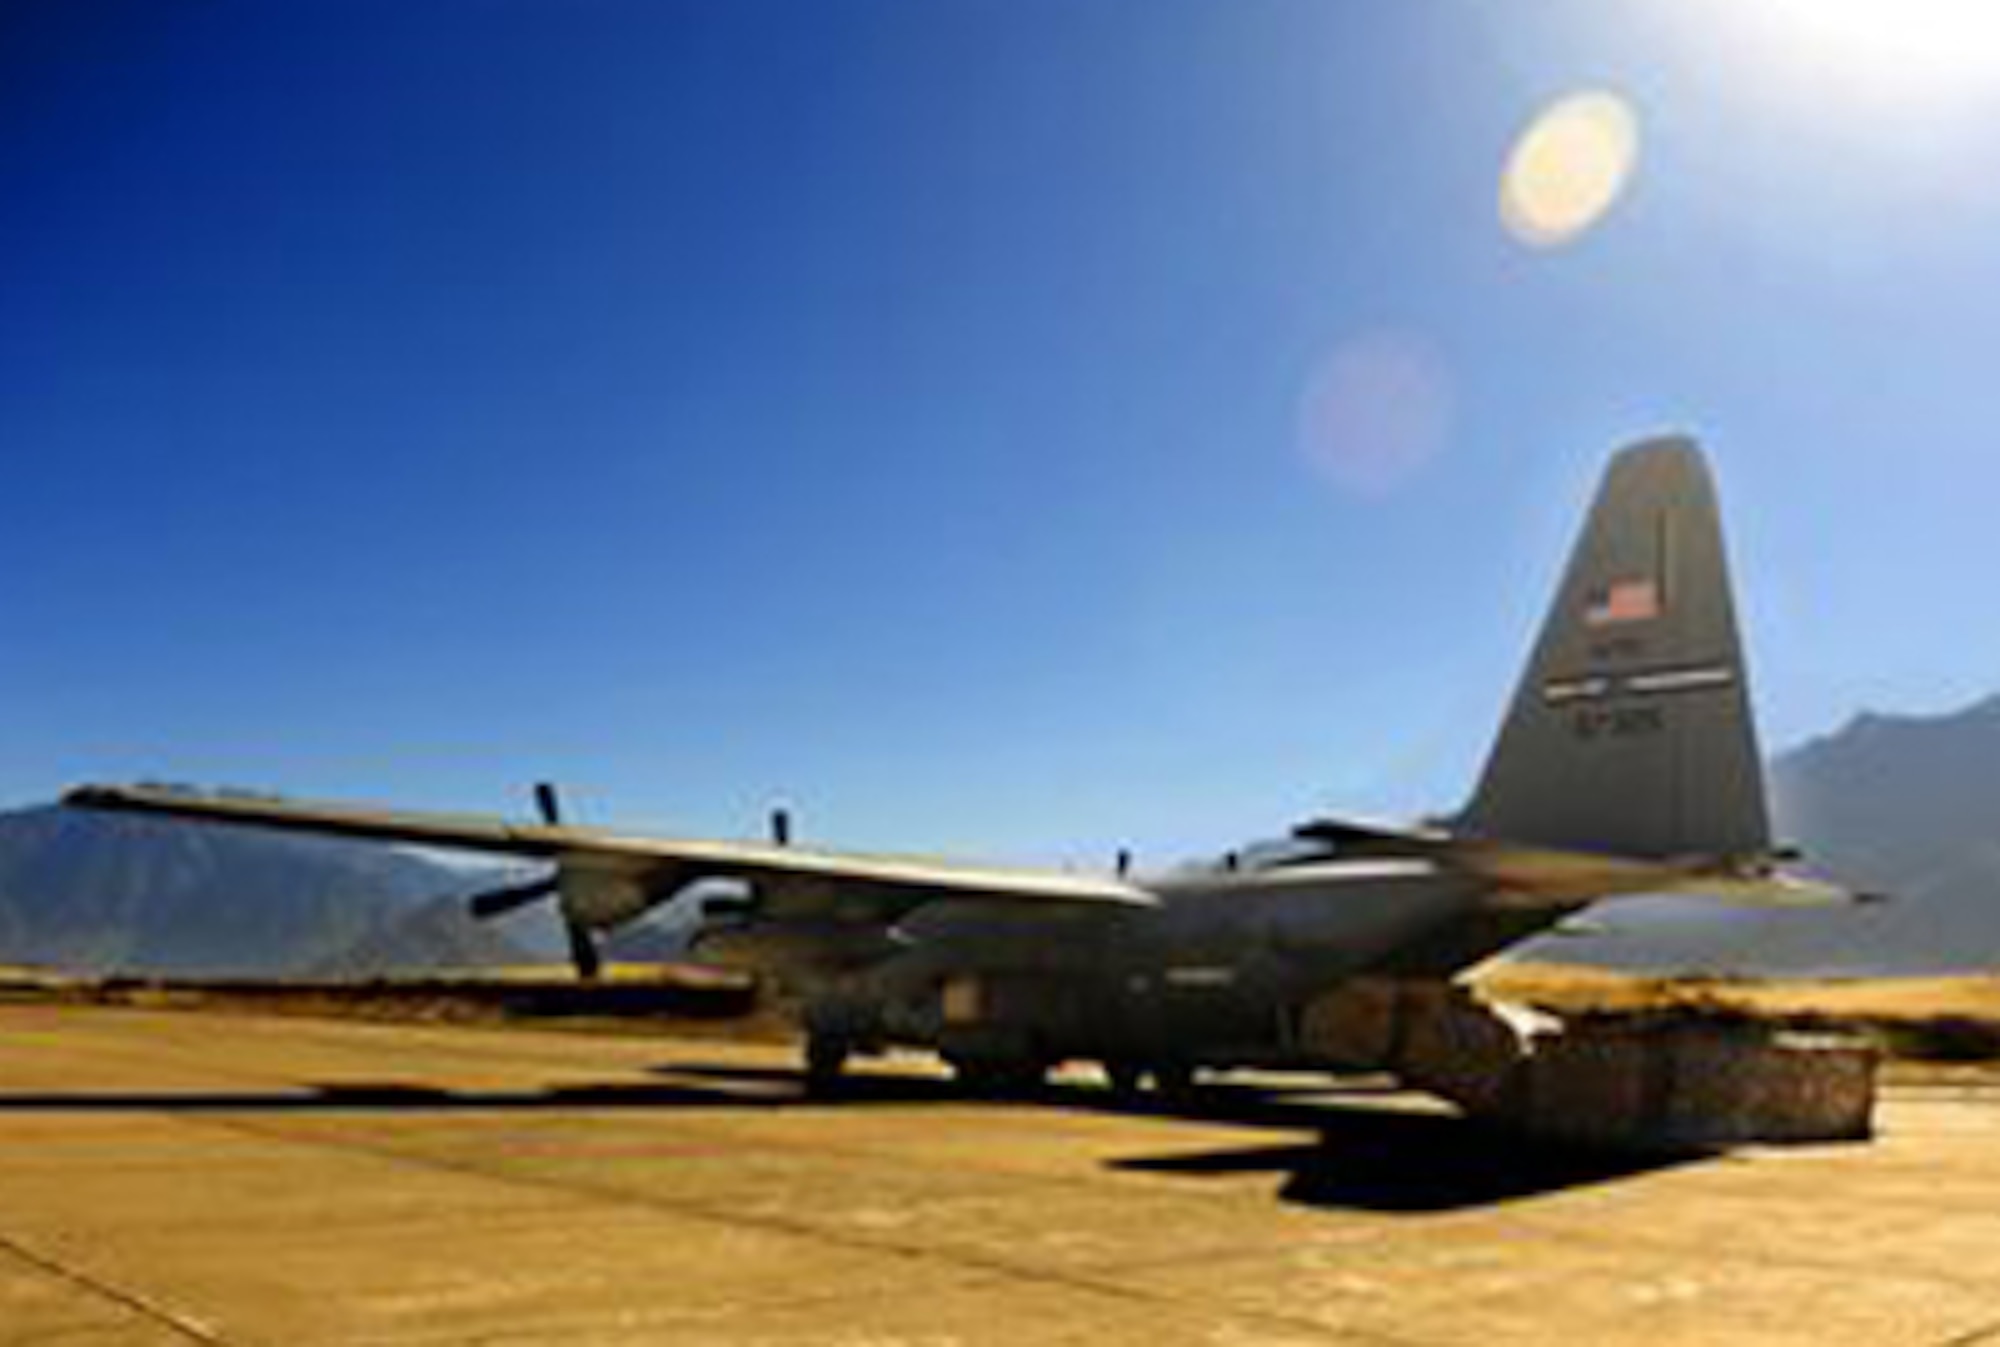 A C-130 Hercules is positioned to unload humanitarian aid supplies Oct. 3, 2010, at Skardu Airfield, Pakistan. U.S. military aircrews, worked in close coordination with the Pakistan military, transported more than 6.6 million kilograms of relief supplies and evacuated 21,000 people in the flood-affected regions of Pakistan during August and September. (U.S. Air Force photo/Staff Sgt. Andy Kin) 